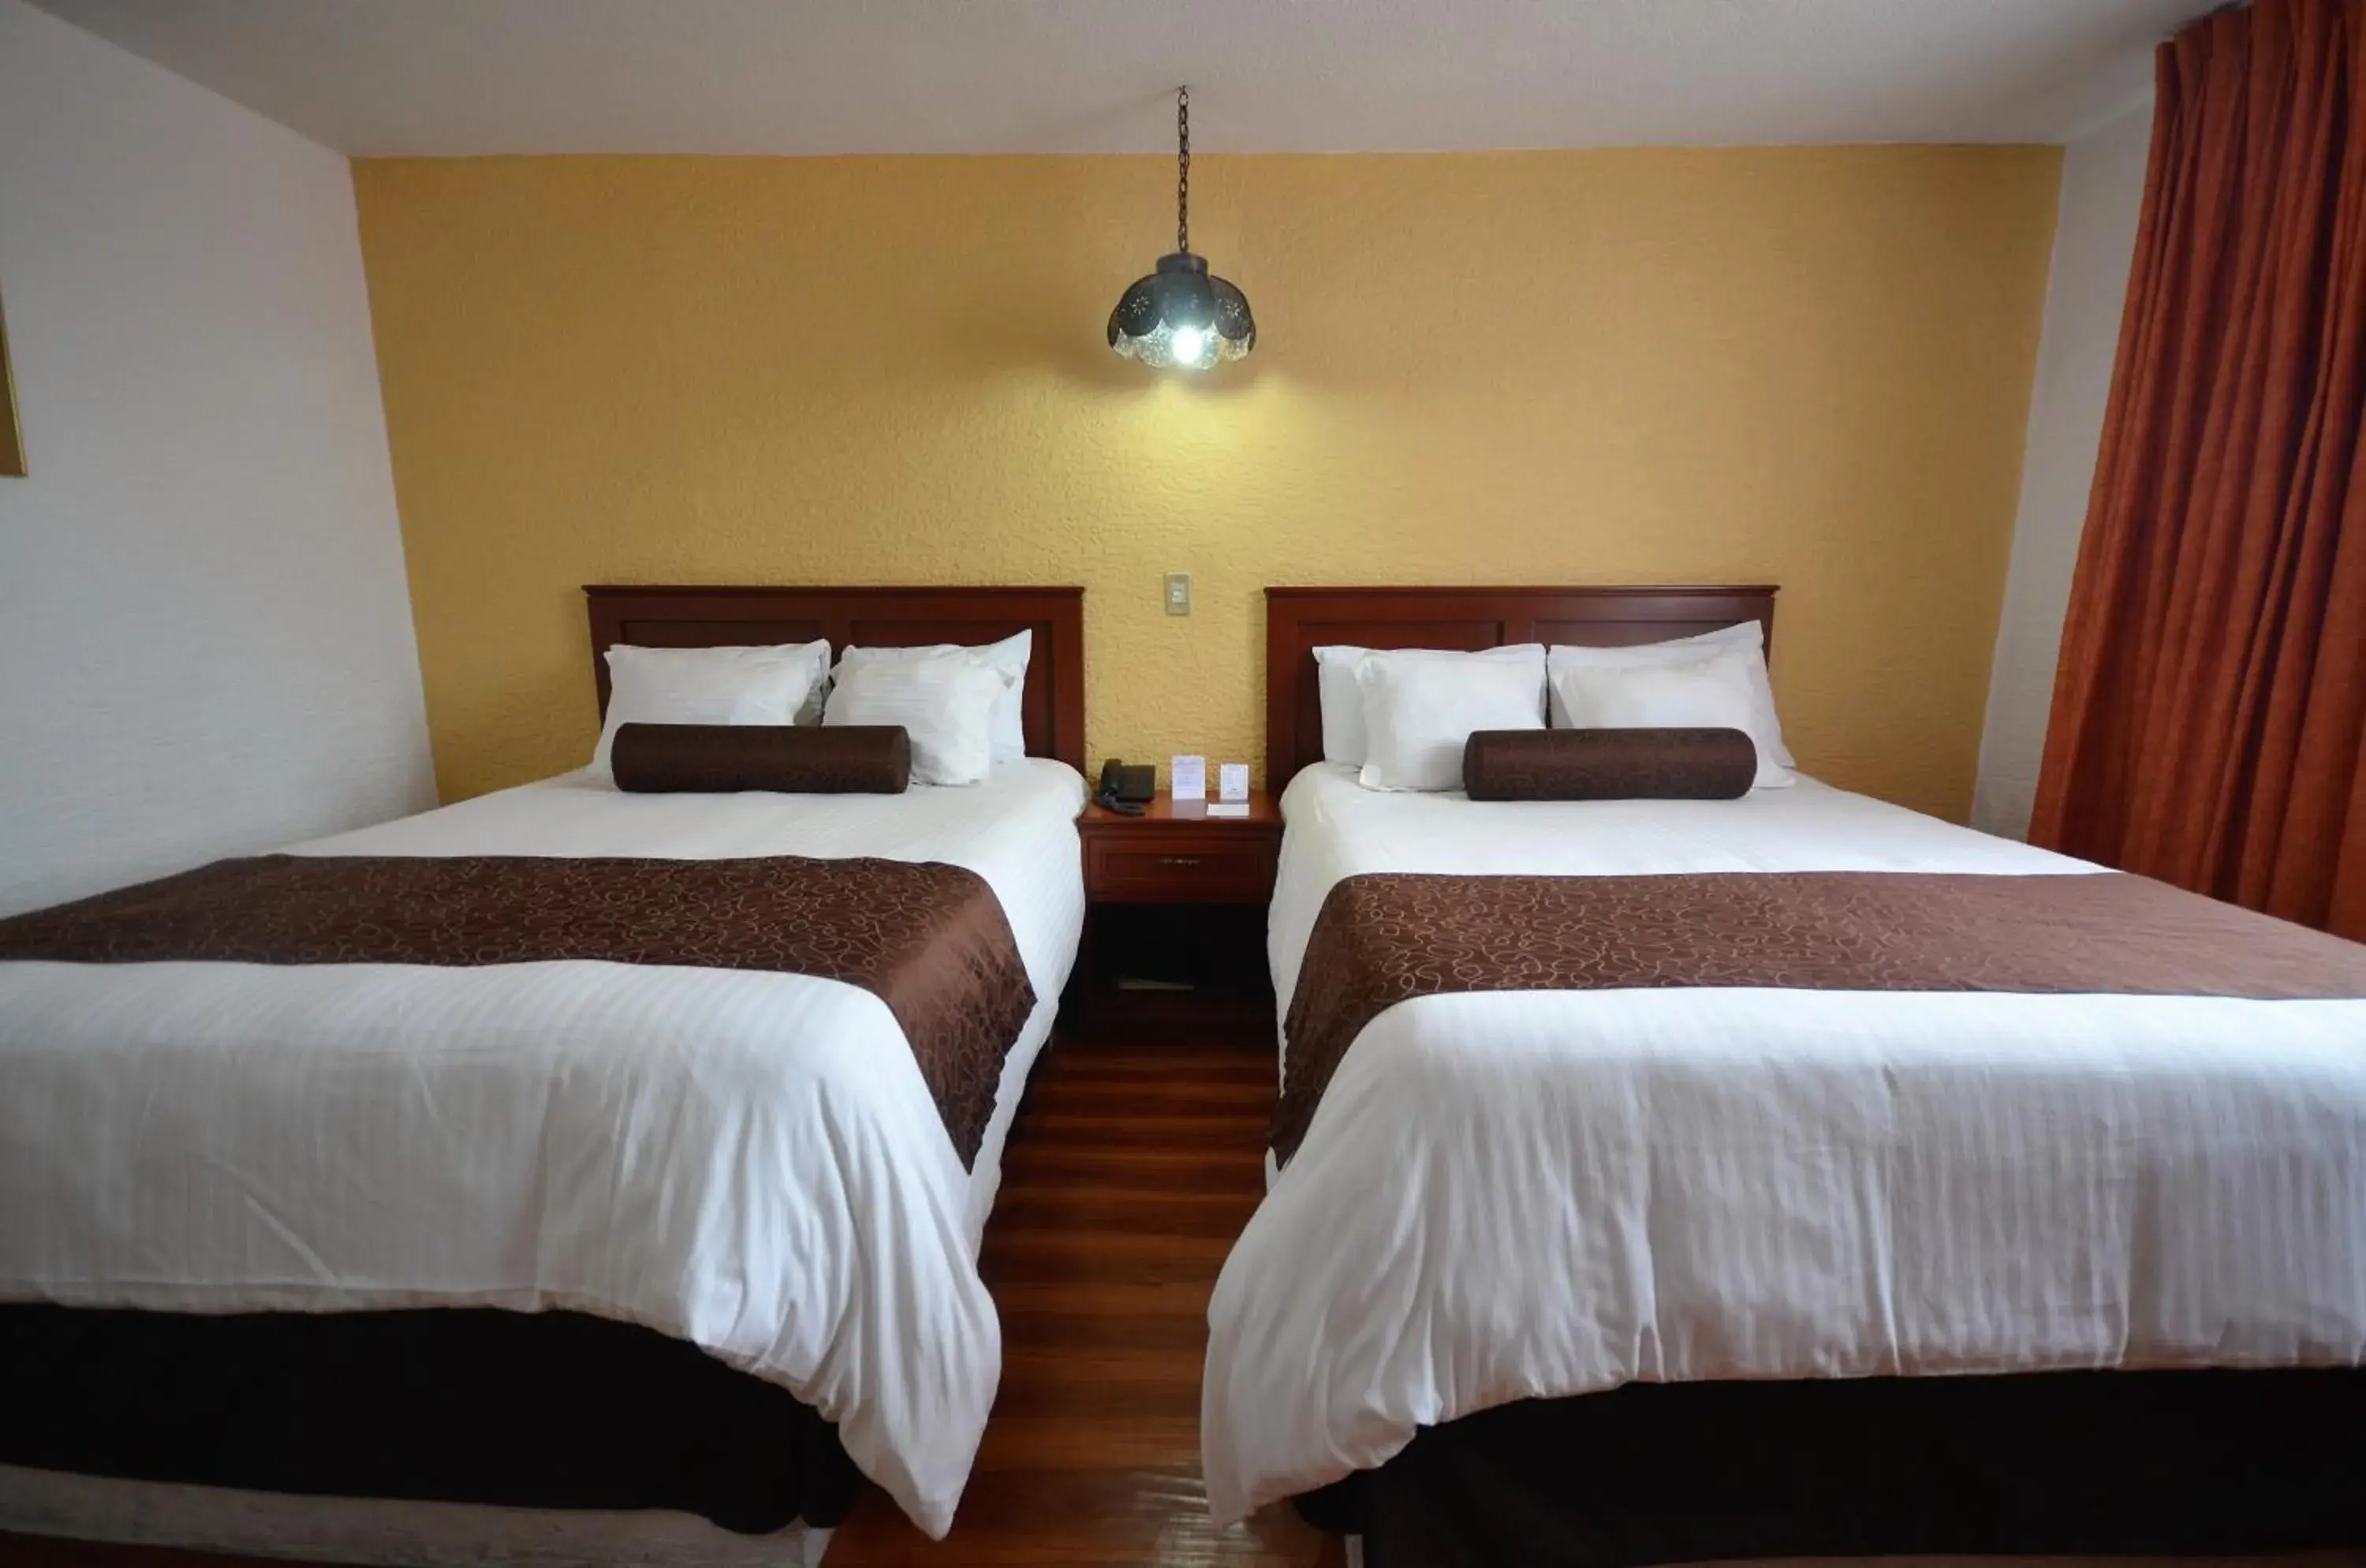 Bed, Room Photo in Howard Johnson Calle Real Morelia